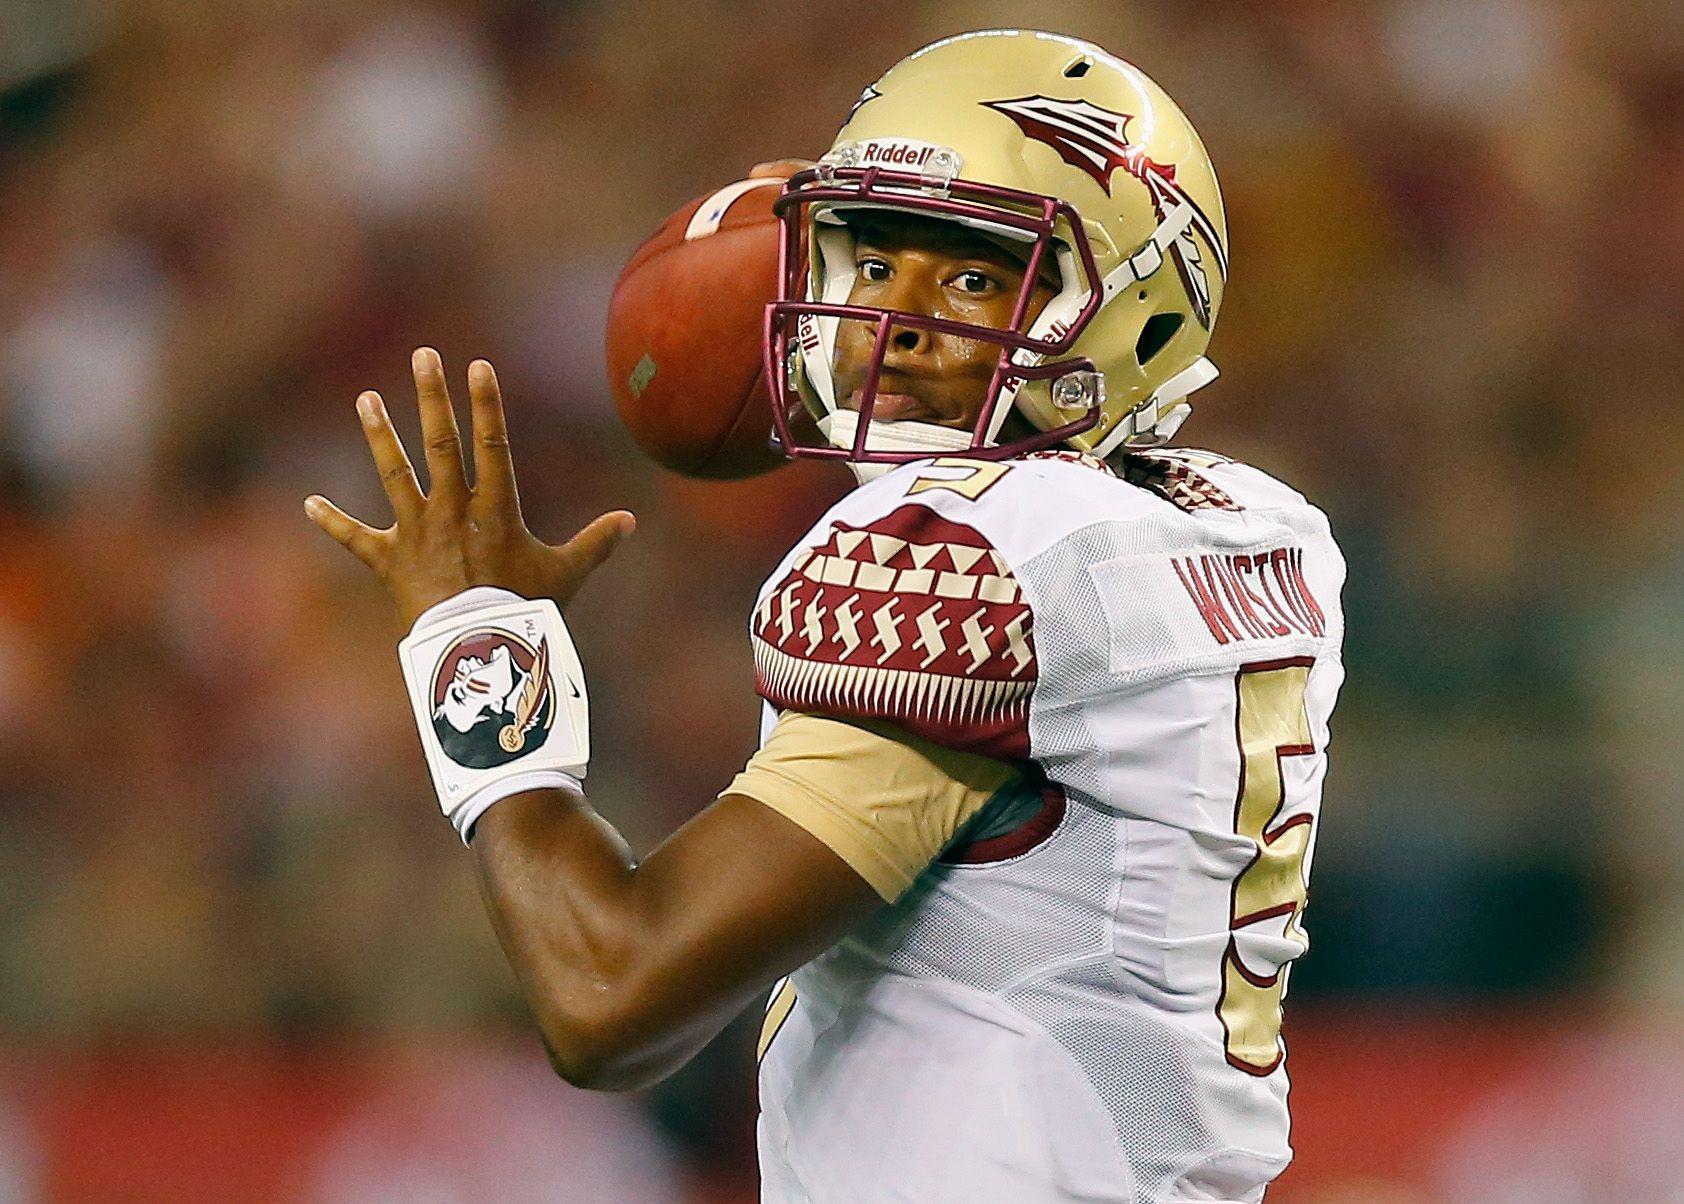 Students question FSU's handling of Jameis Winston case. Sports